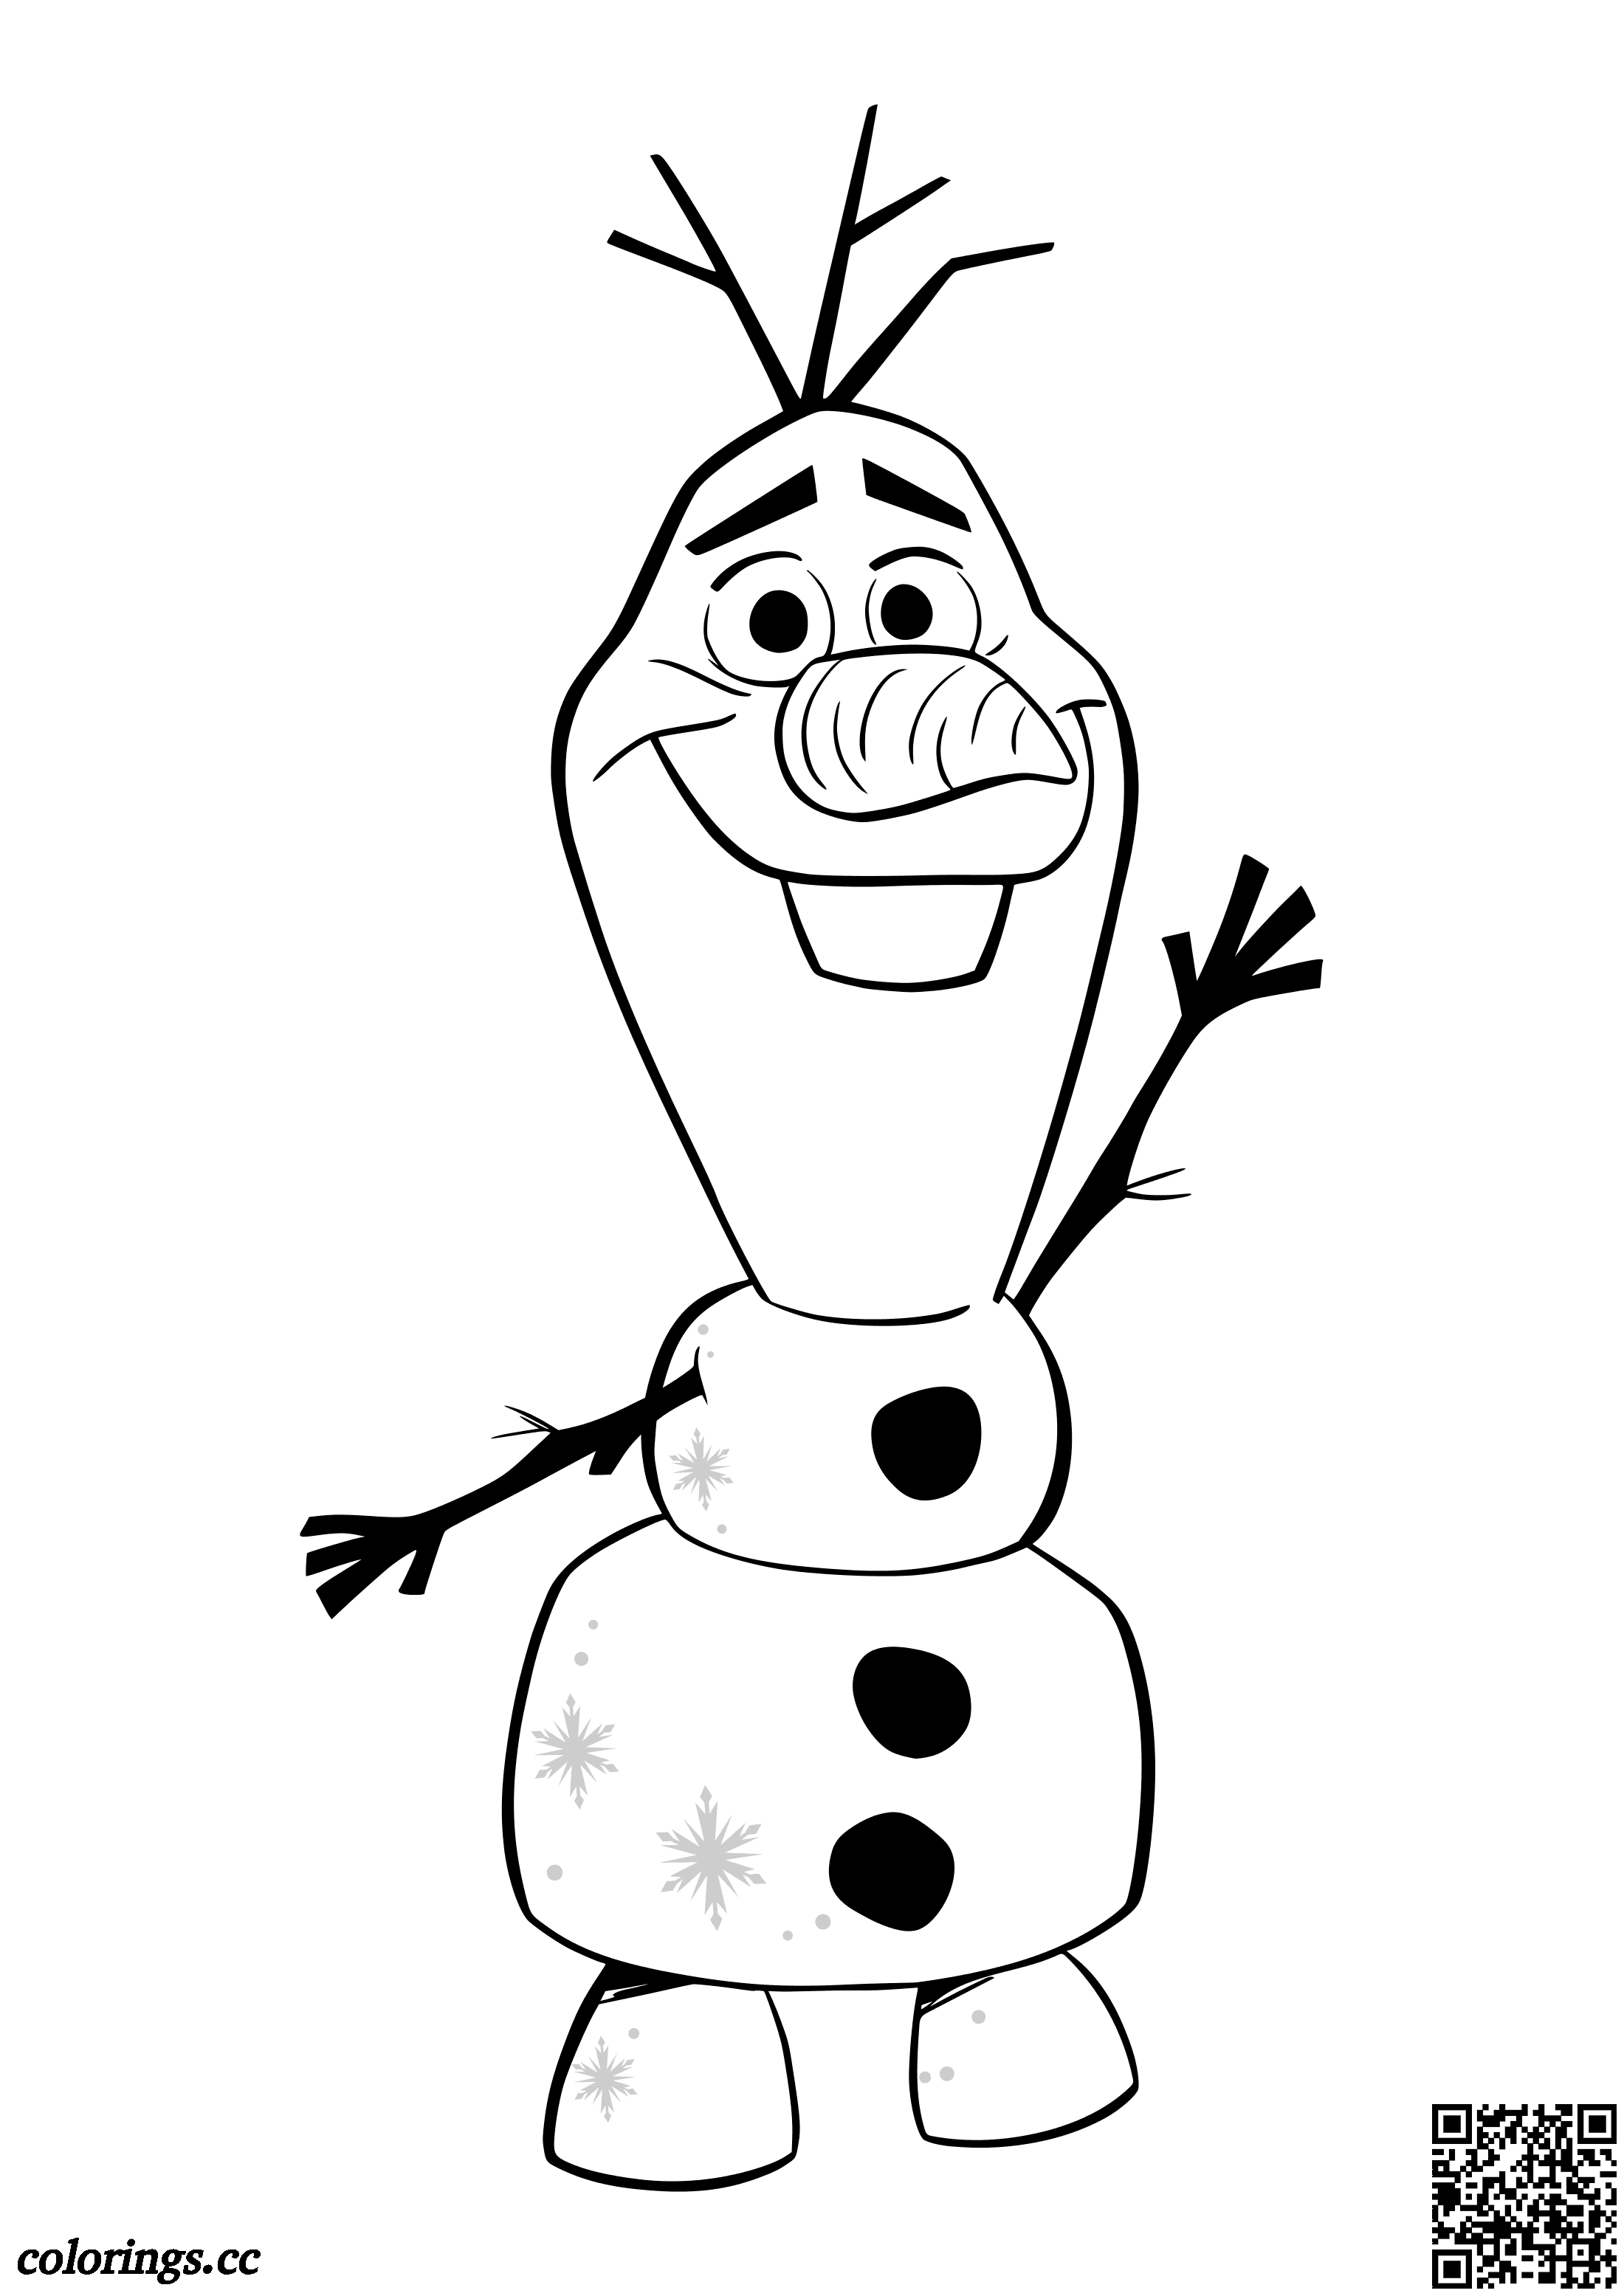 Coloring Page   Good Olaf coloring pages, Frozen 20 coloring pages ...